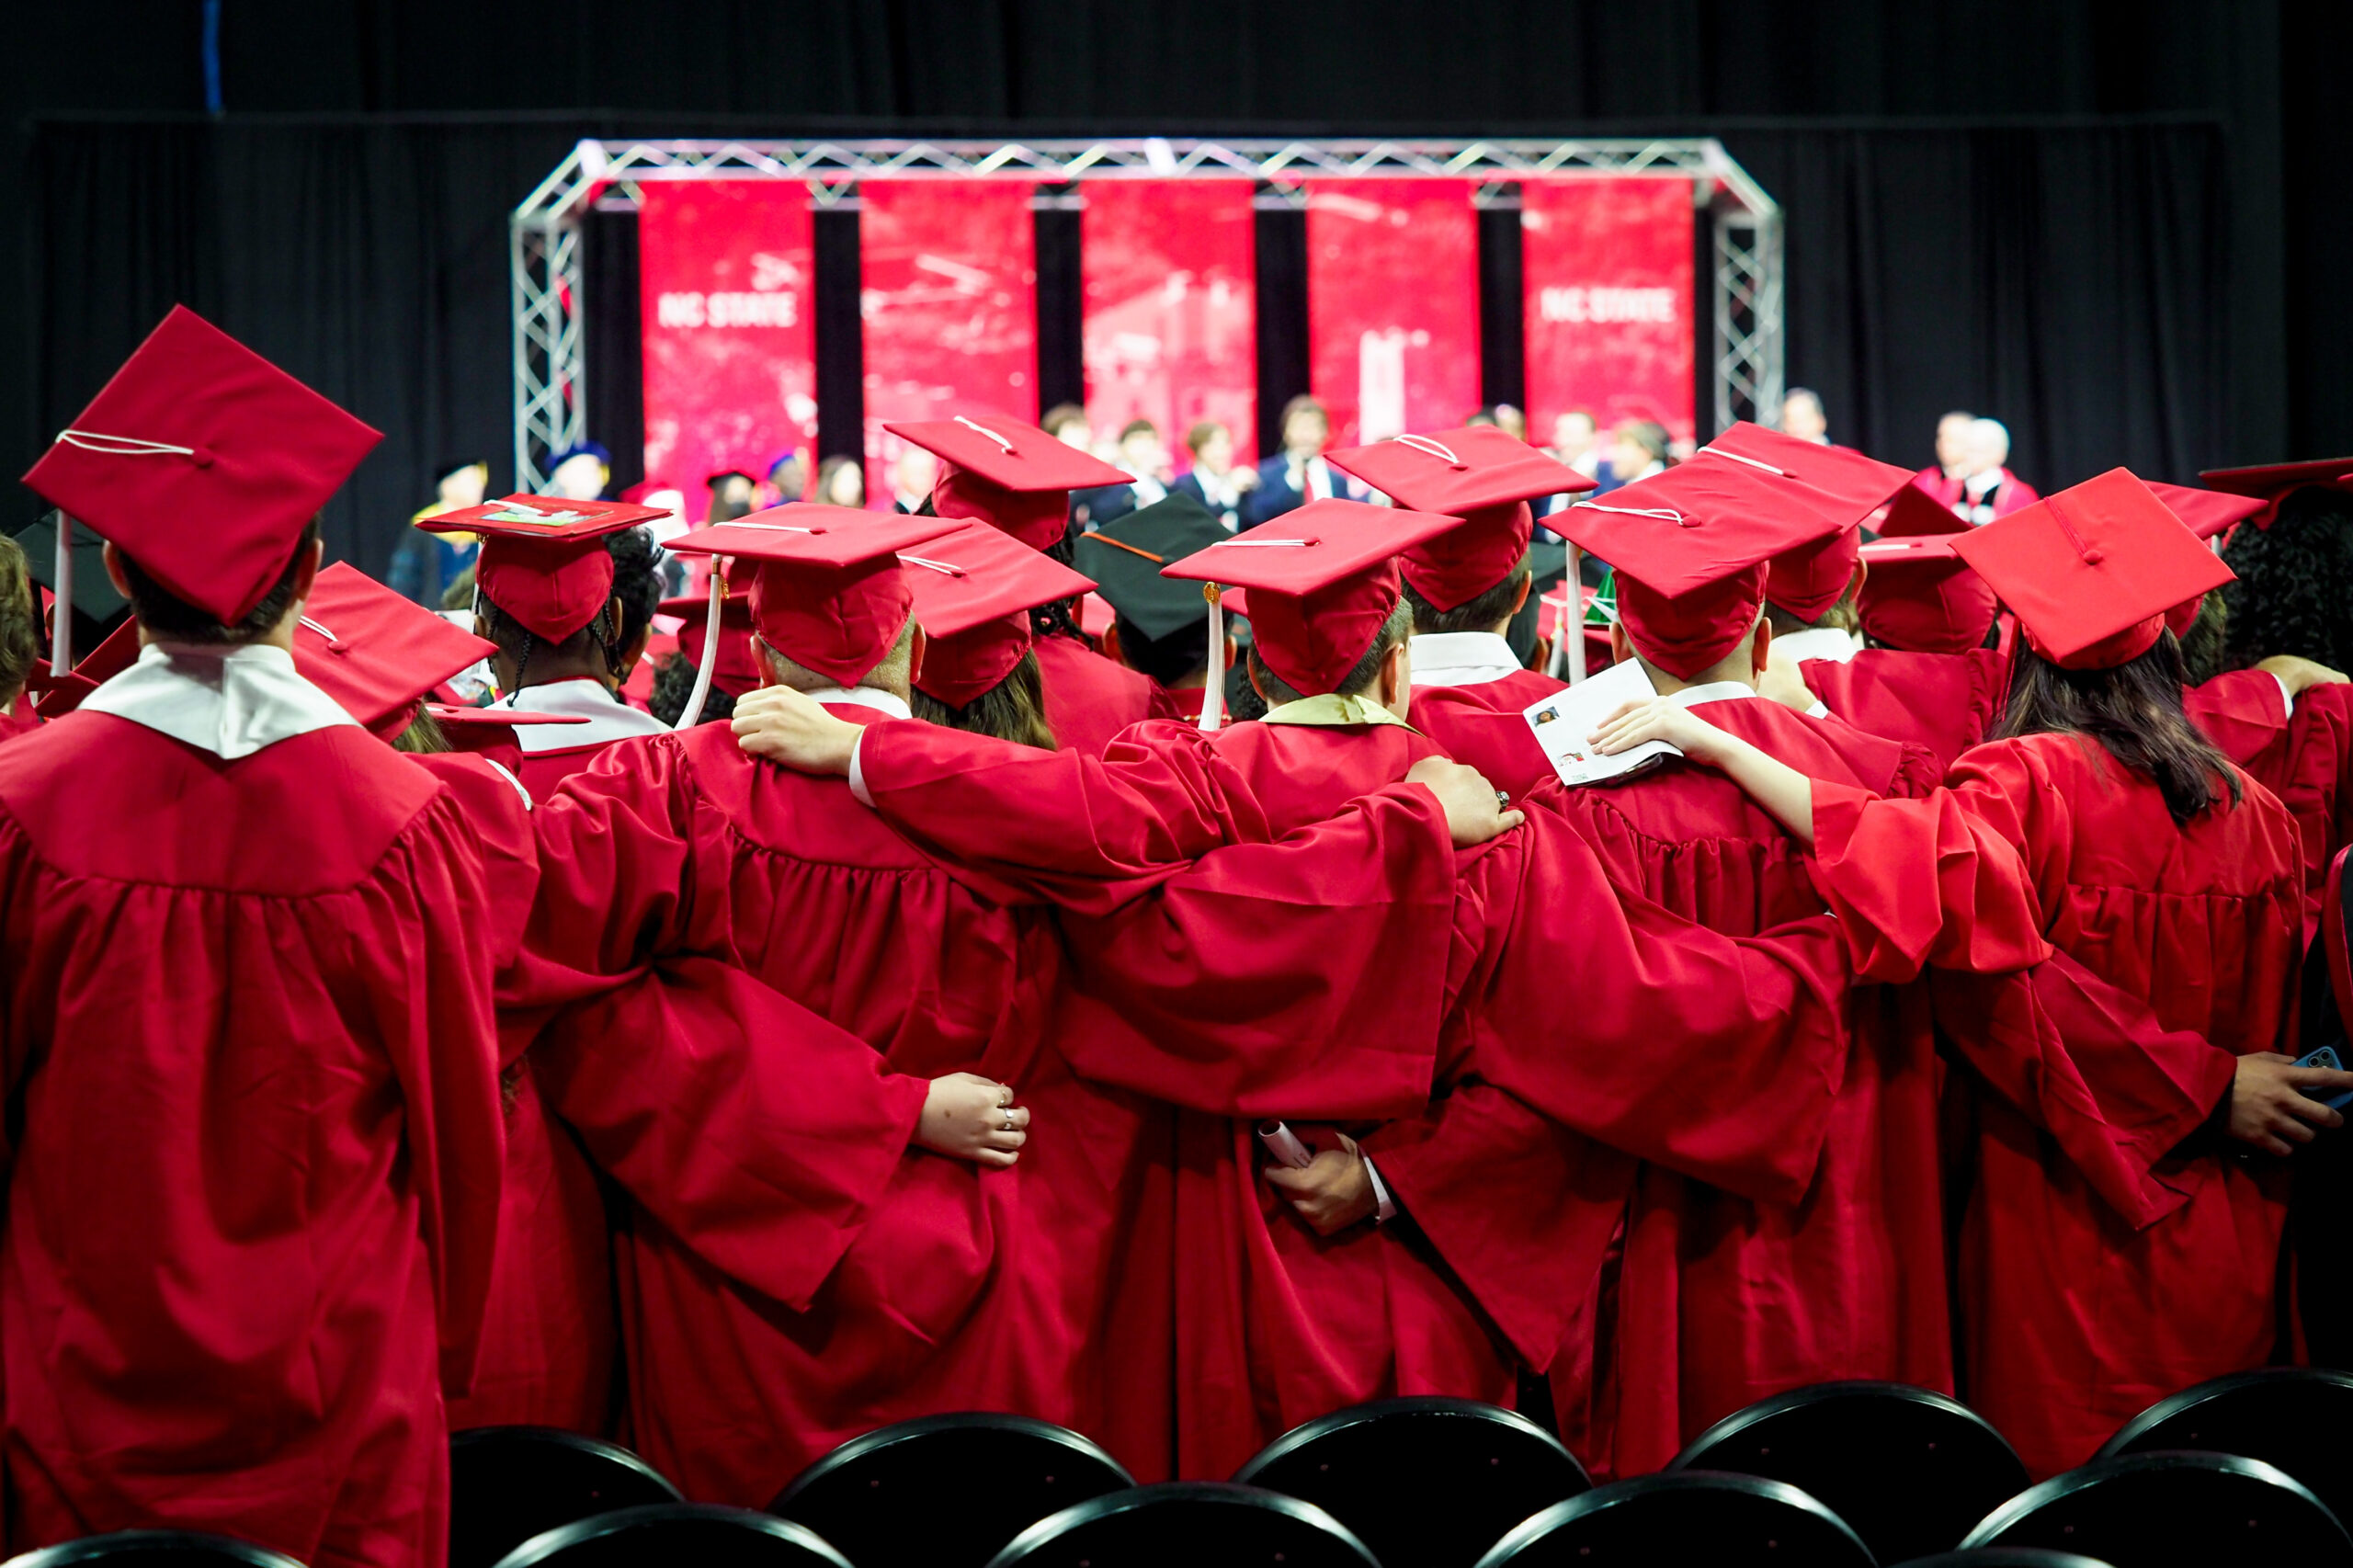 Students standing together in caps and gowns.